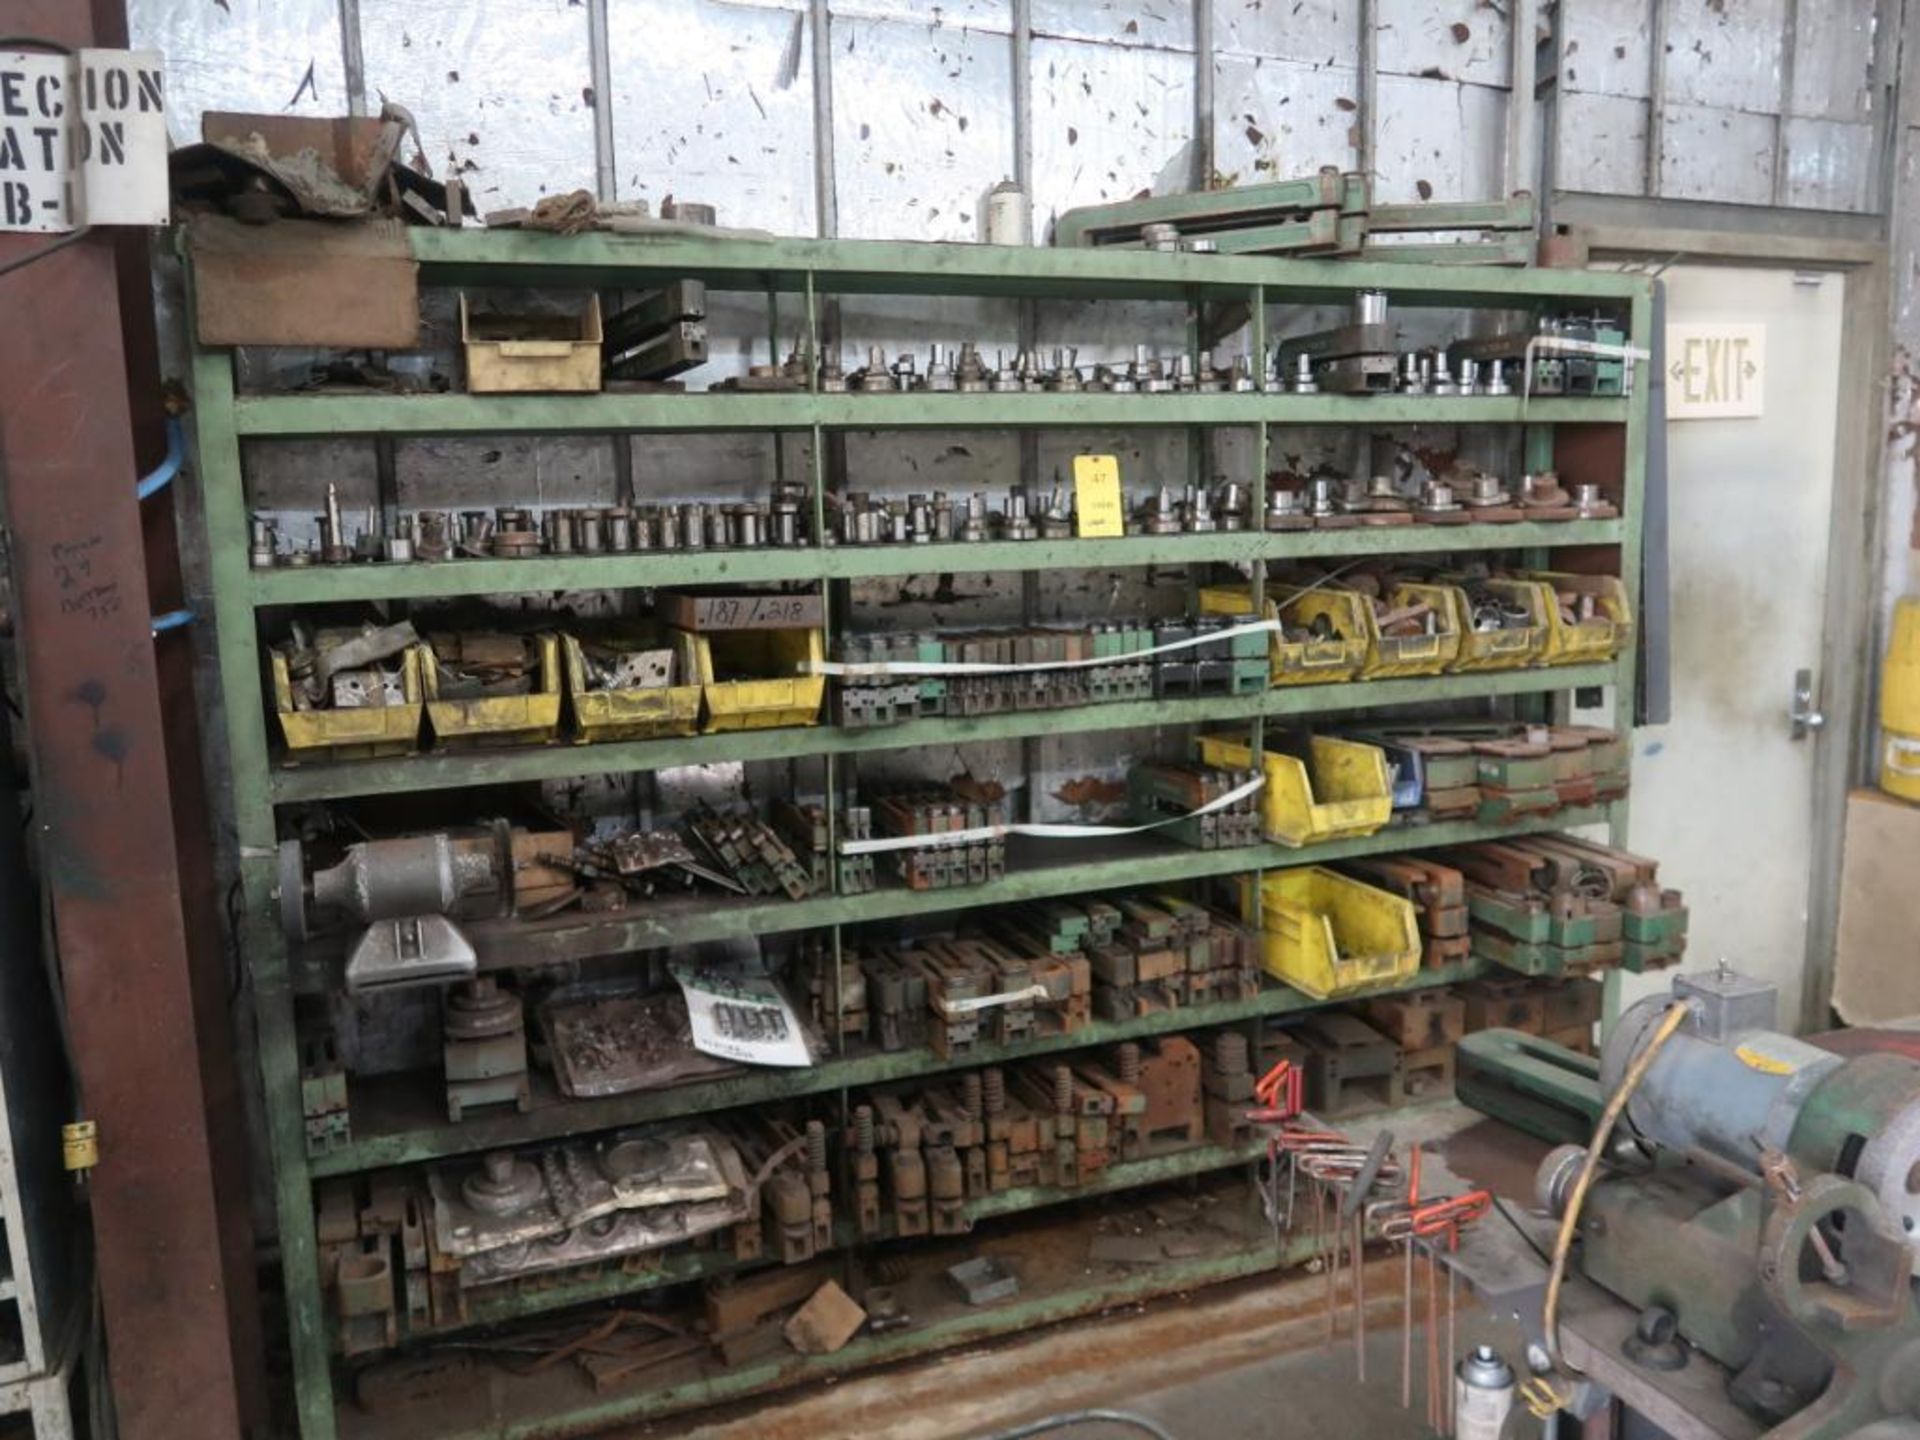 LOT: Assorted Dies, Punch Plates, Set-Up Plates, and Press Tooling